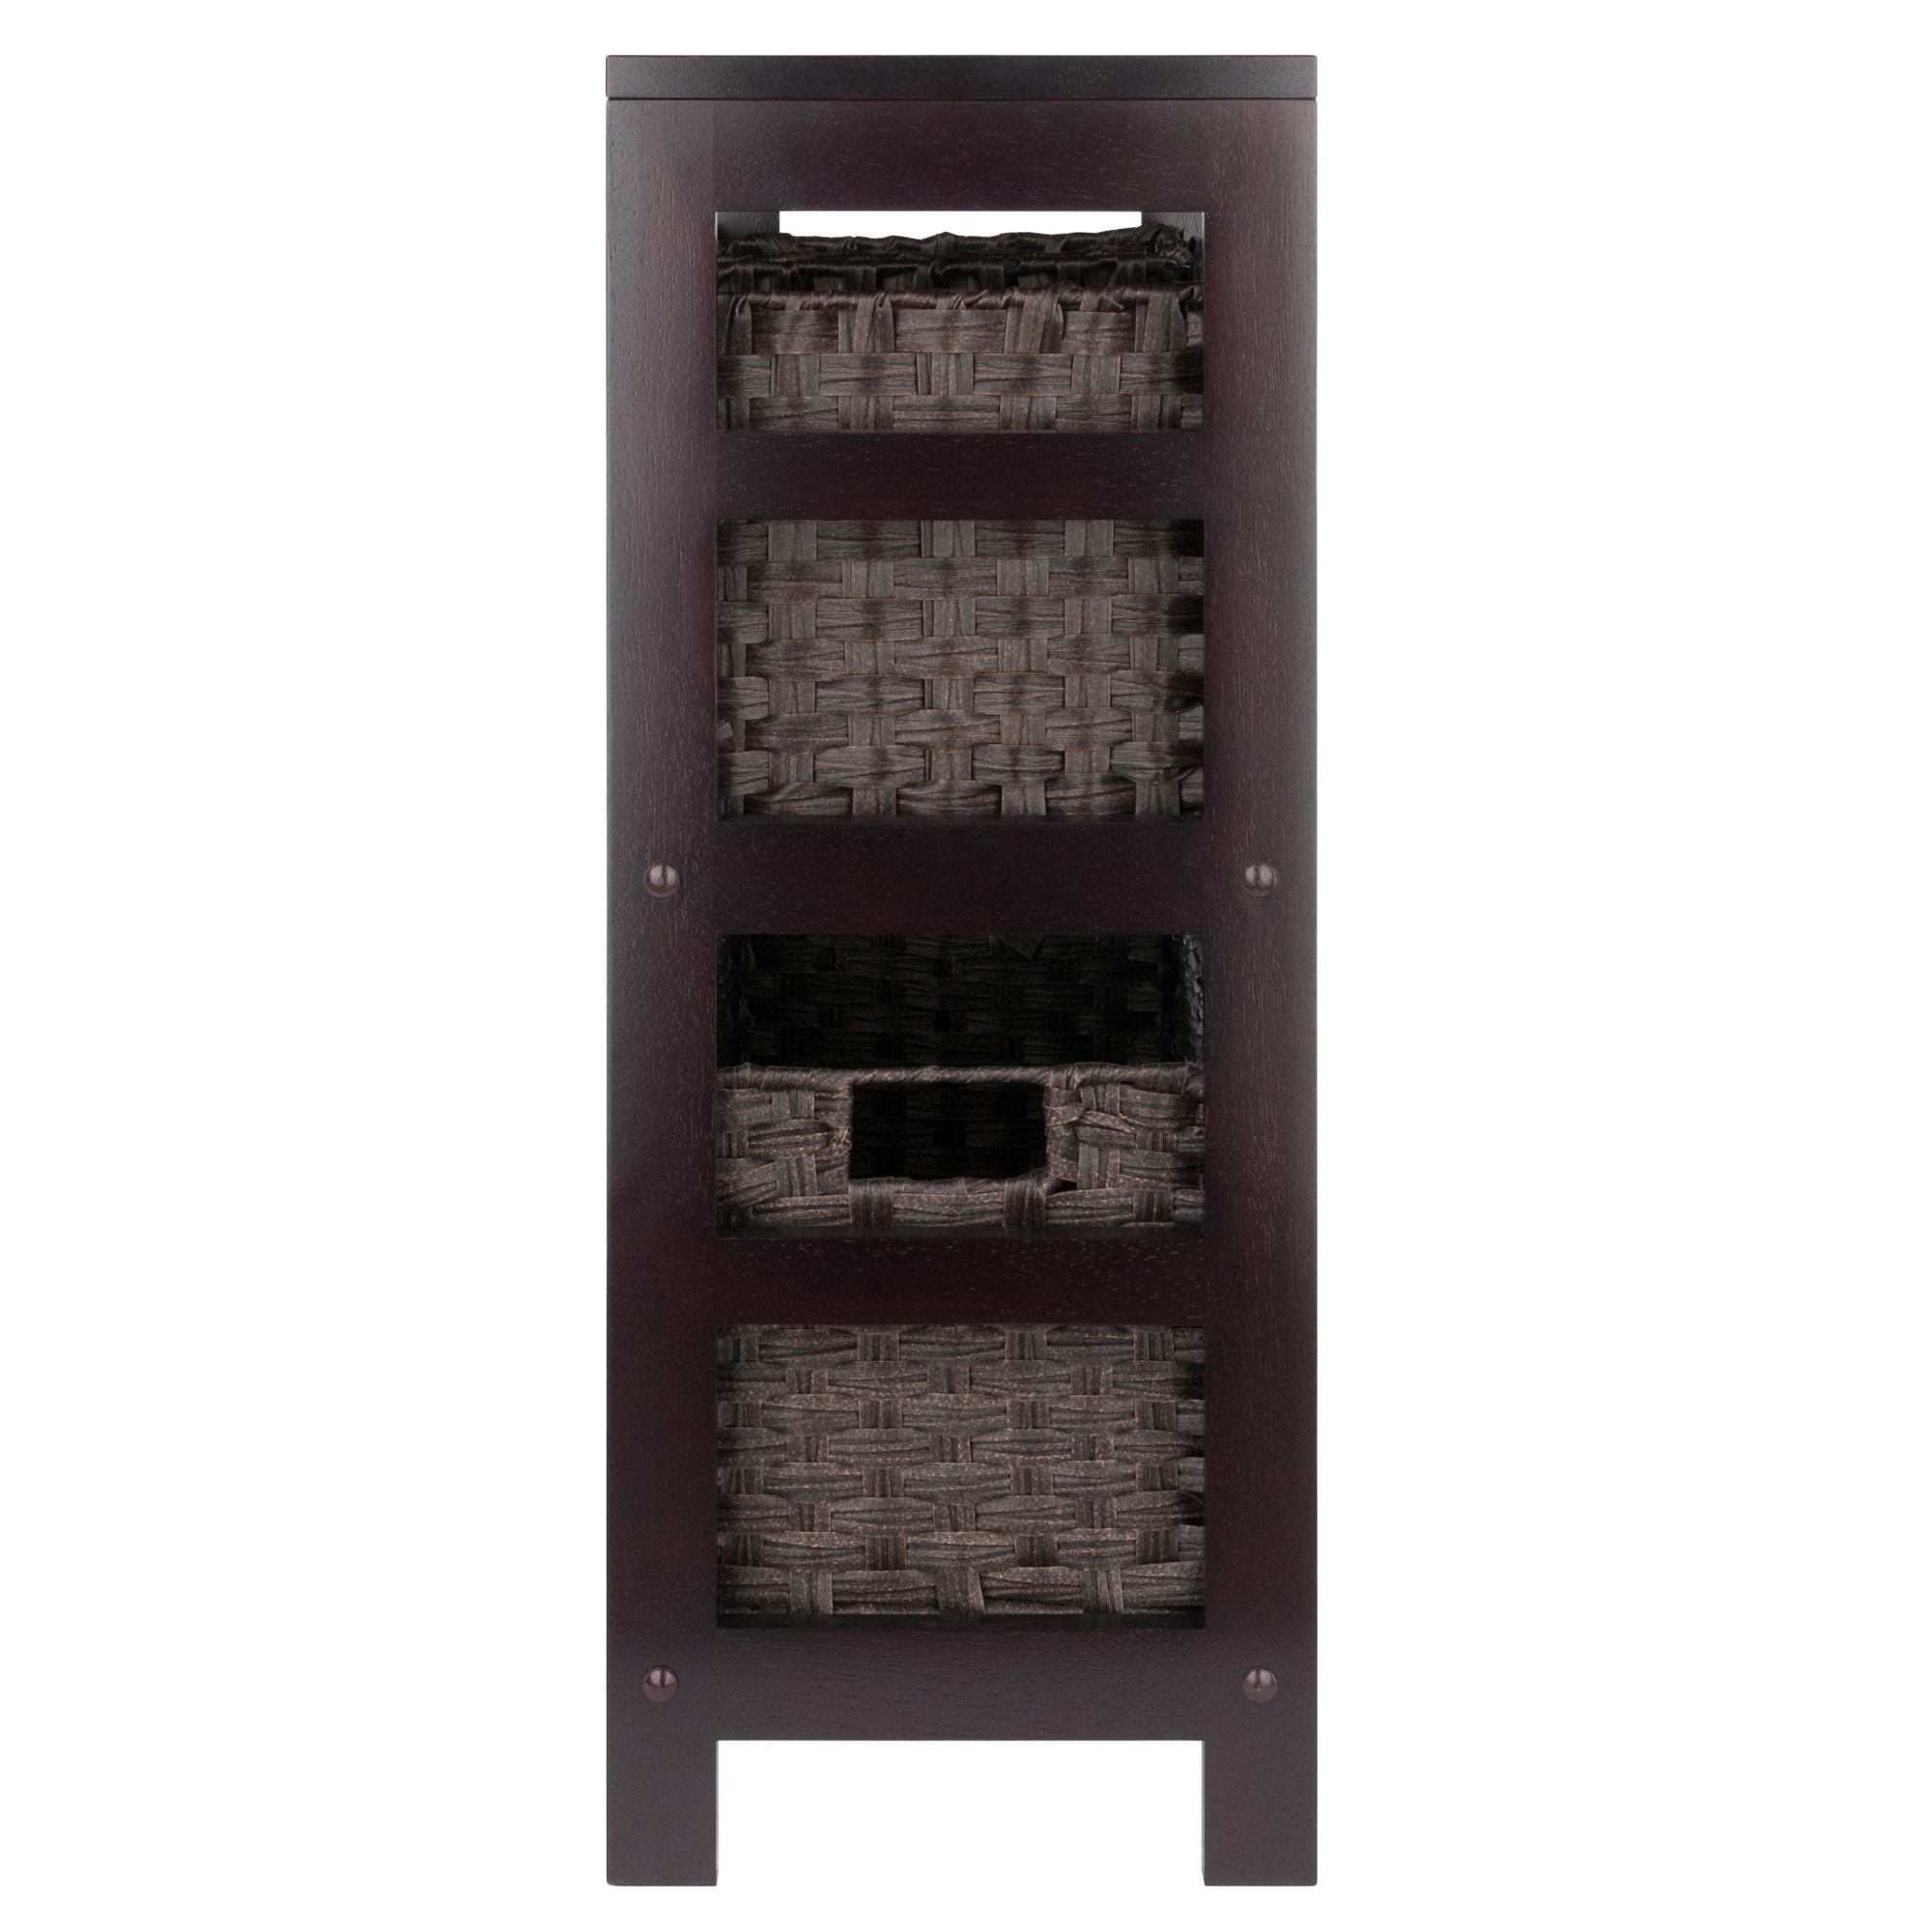 https://ak1.ostkcdn.com/images/products/is/images/direct/566d7f04e54d0e6def589802edc0f99aa8100212/Leo-4-Pc-Storage-Shelf-with-3-Foldable-Woven-Baskets%2C-Espresso-and-Chocolate.jpg